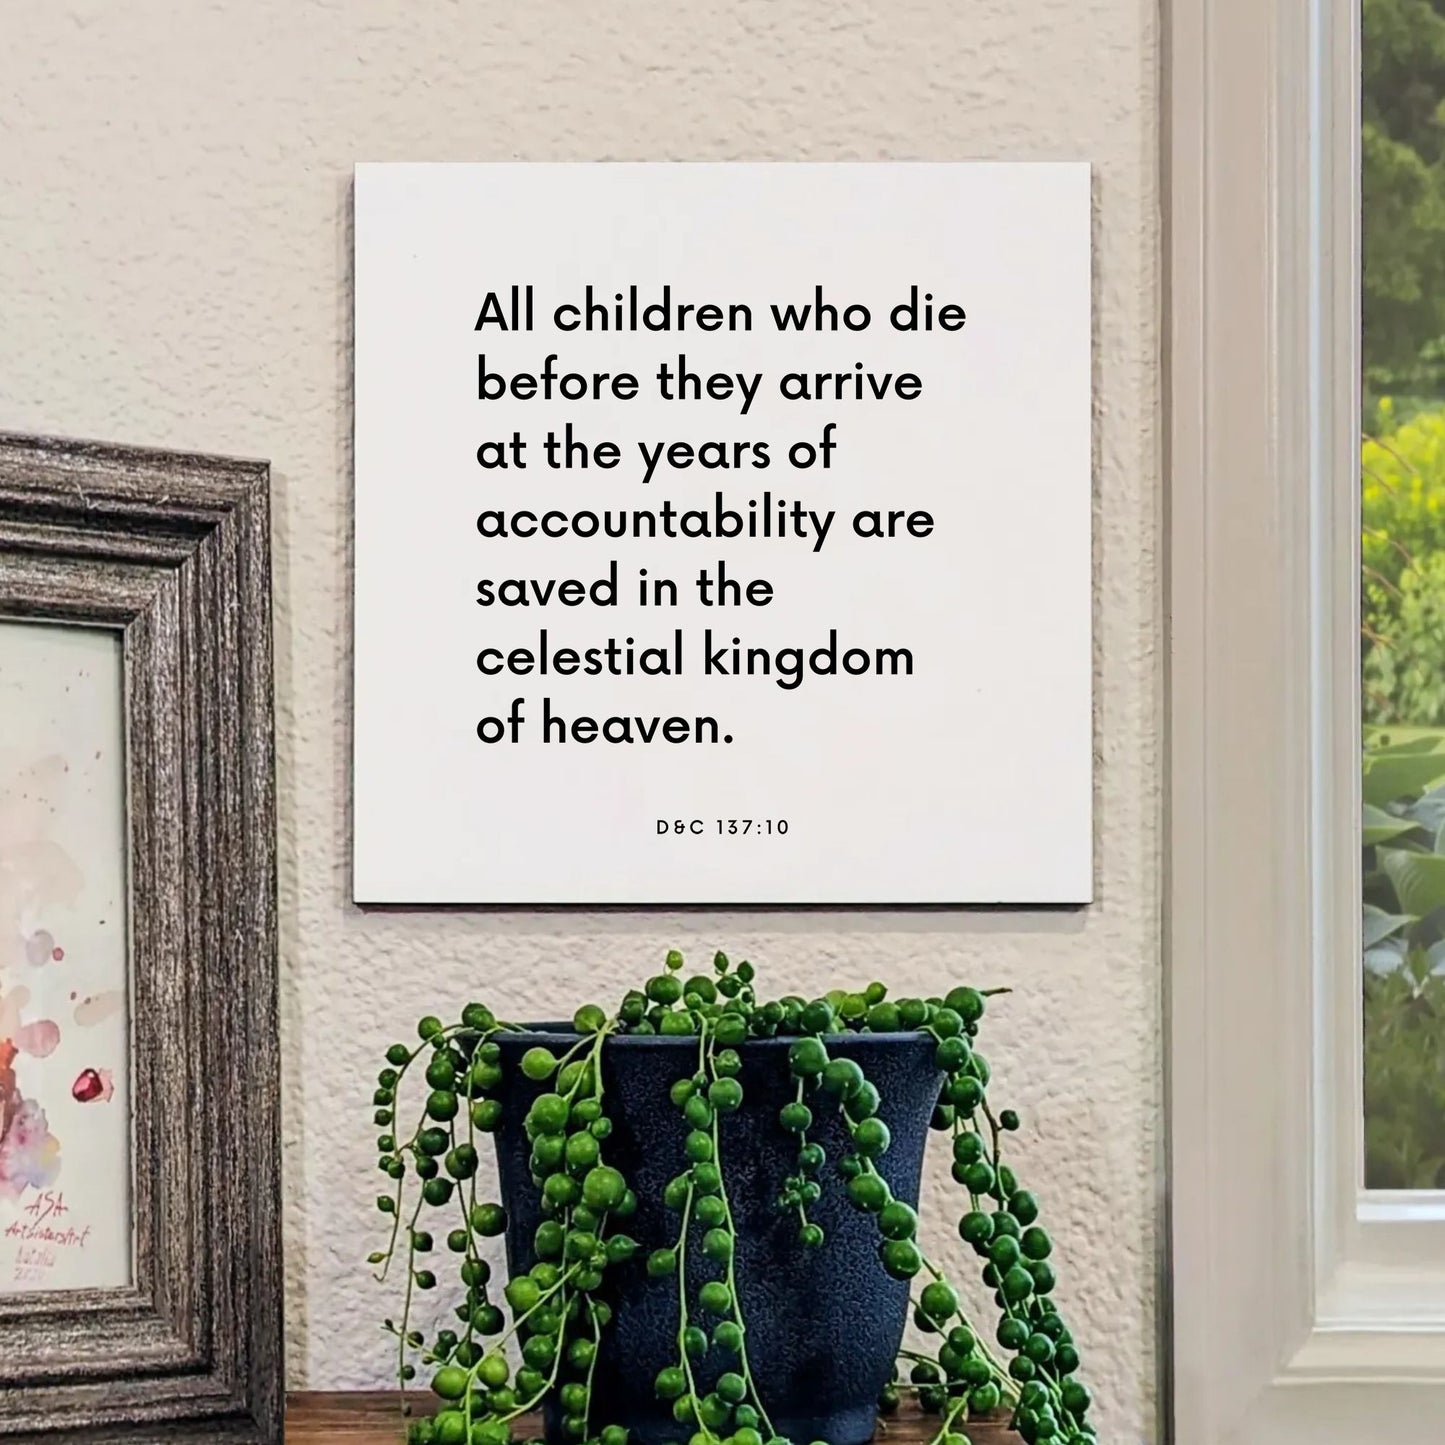 Window mouting of the scripture tile for D&C 137:10 - "All children who die before the years of accountability"